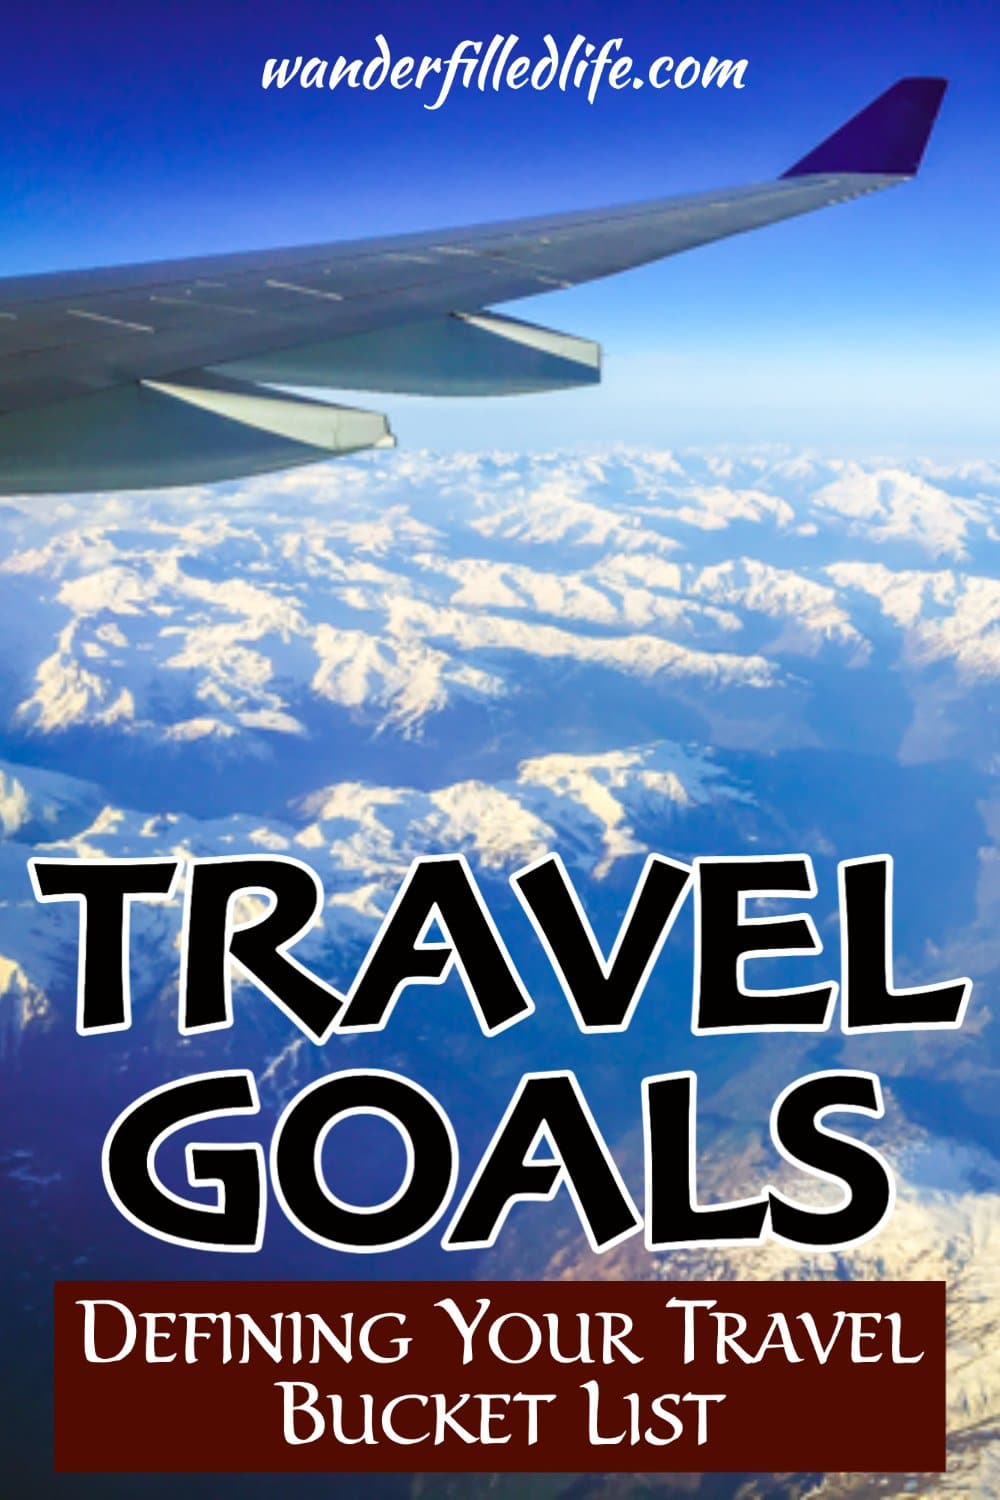 Travel Goals: Defining Your Travel Bucket List - Our Wander-Filled Life